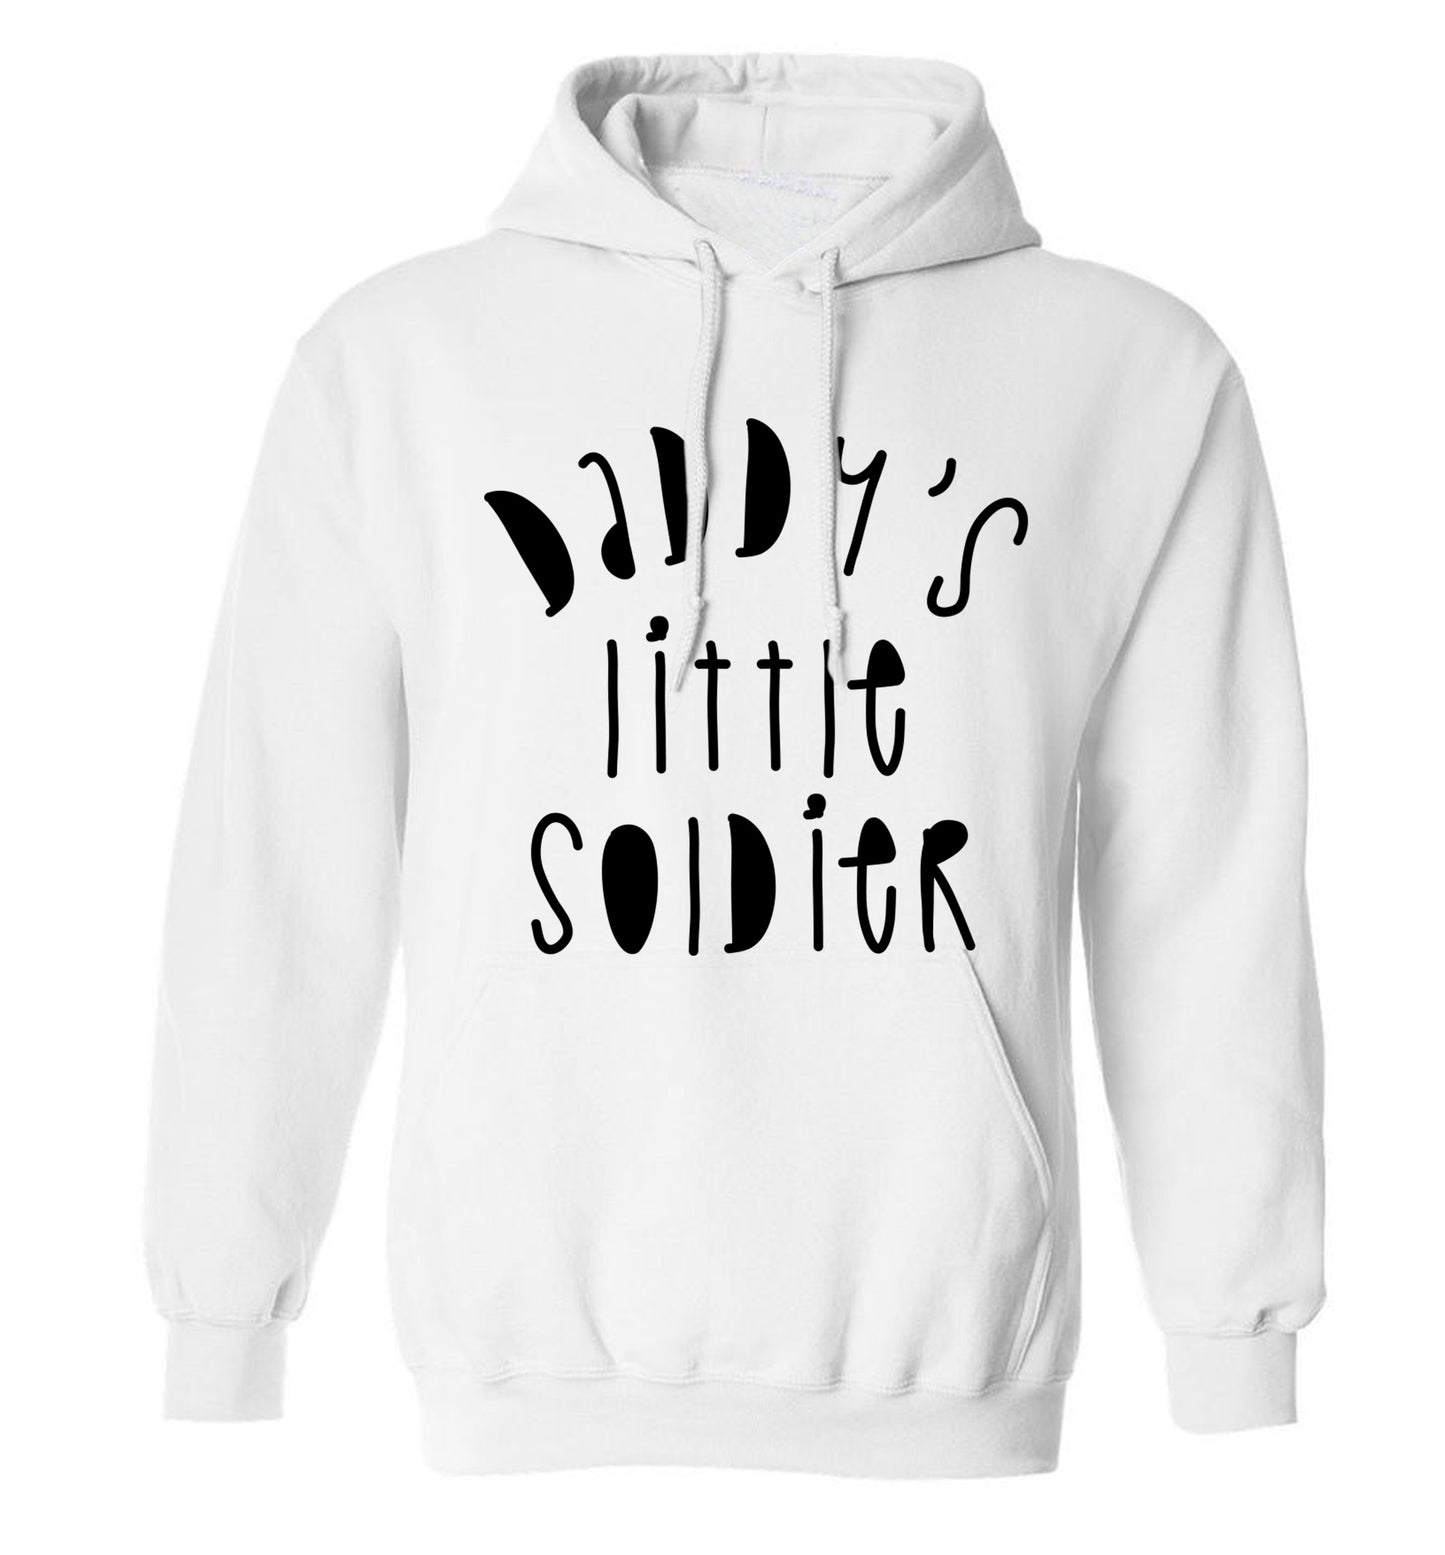 Daddy's little soldier adults unisex white hoodie 2XL